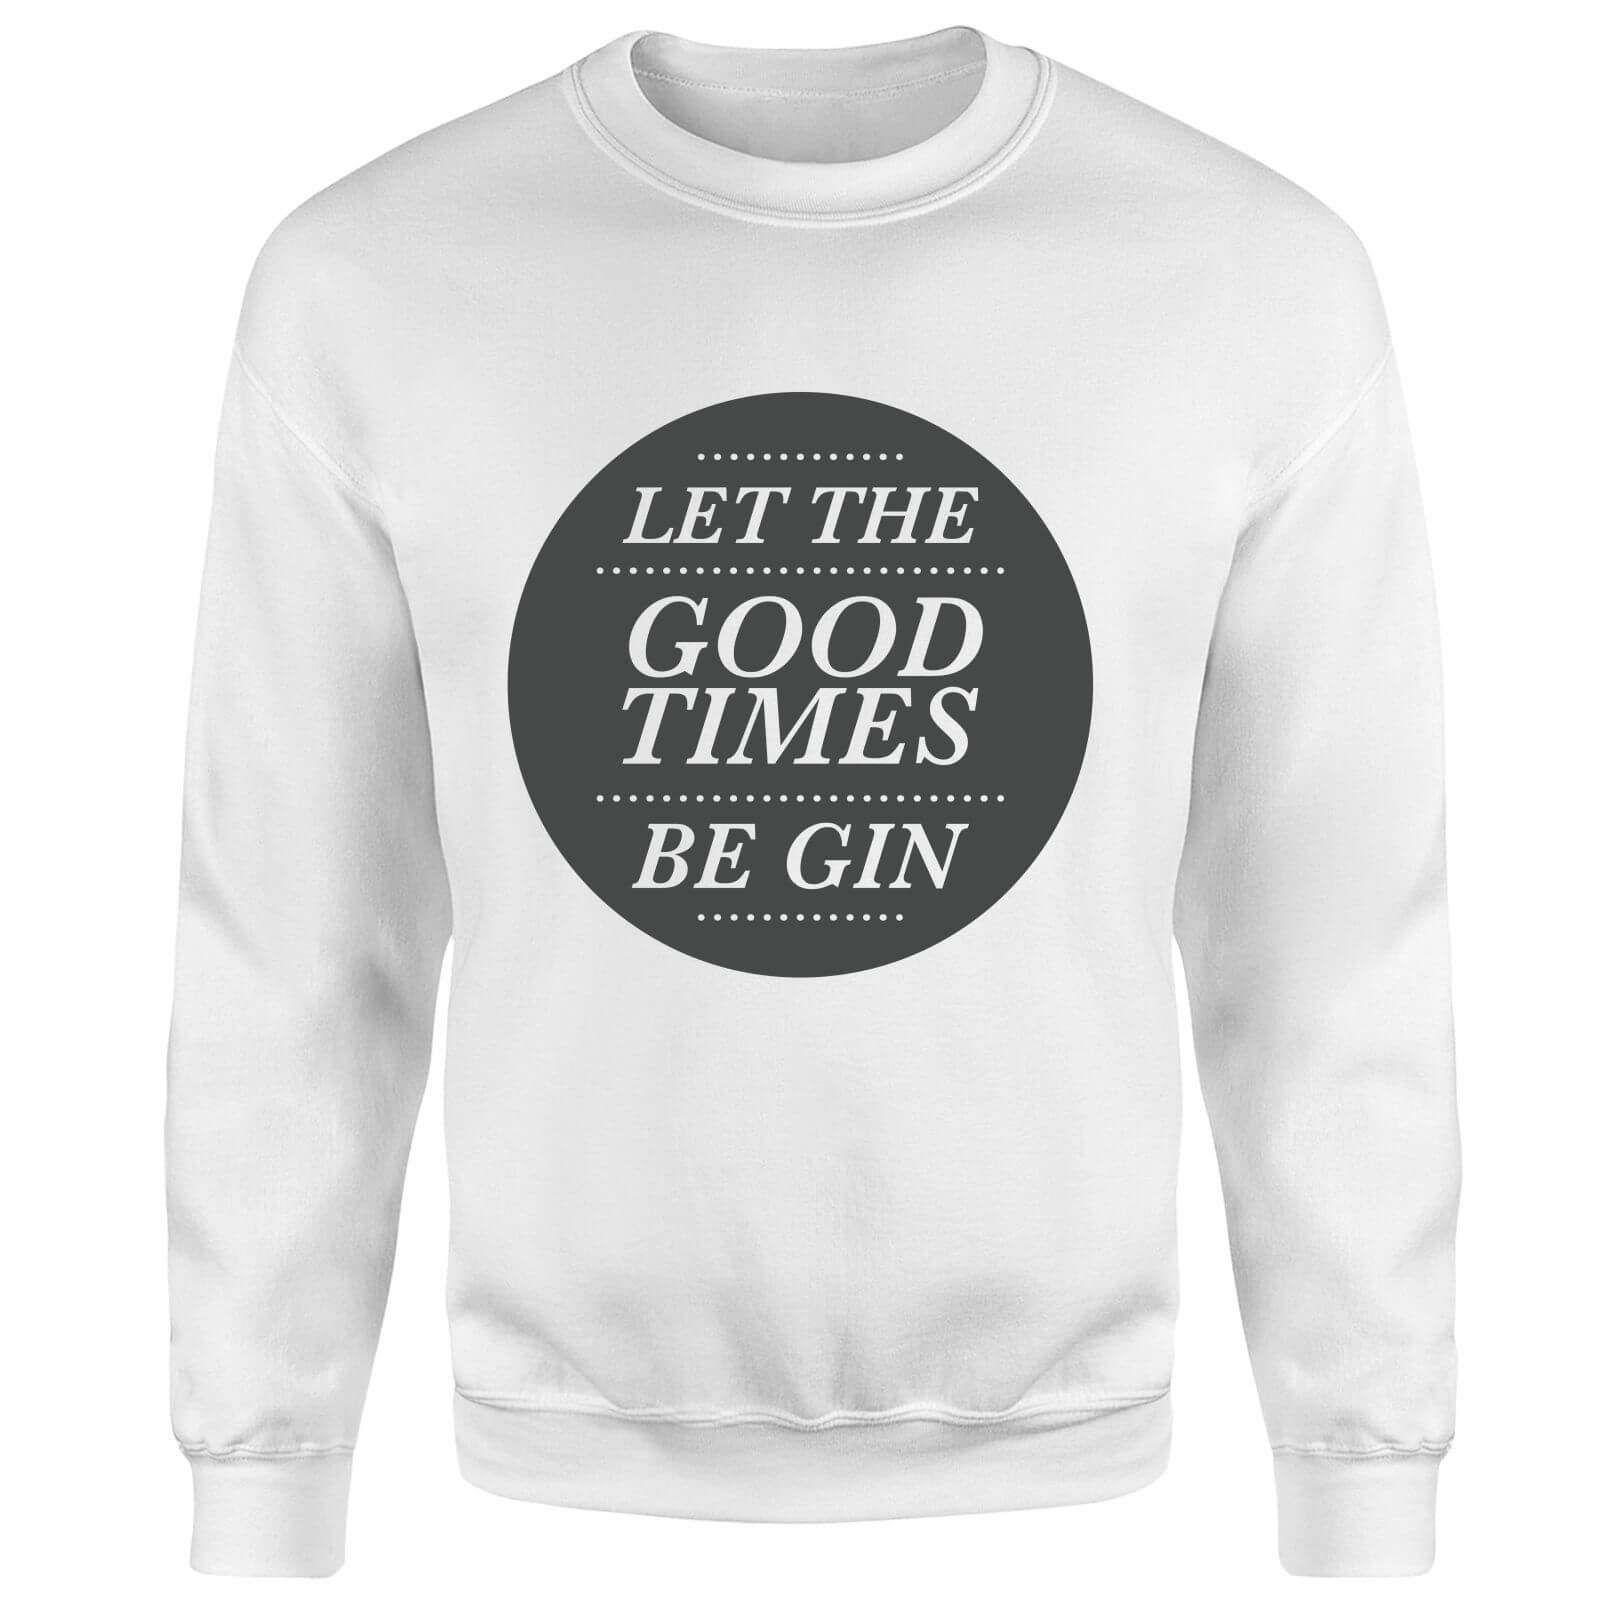 Let the Good Times Be Gin Sweatshirt - White - S - White